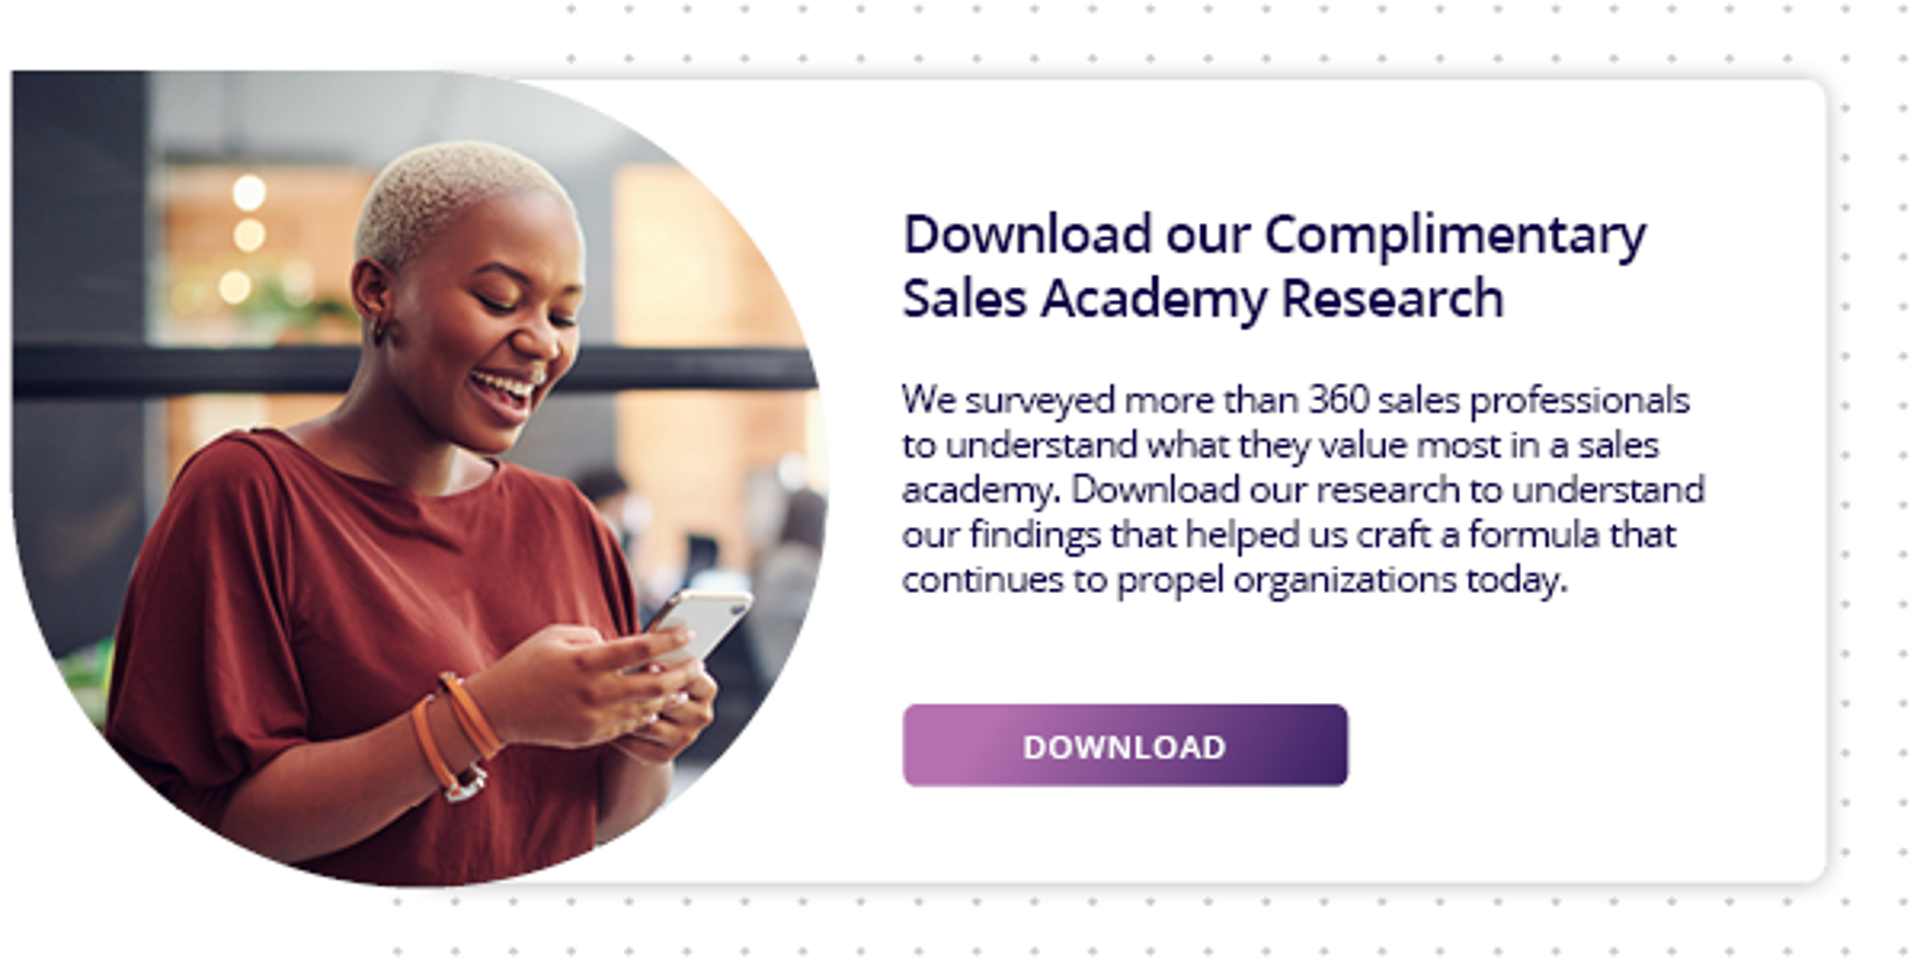 click here to download complimentary research about best practices for building a sales academy